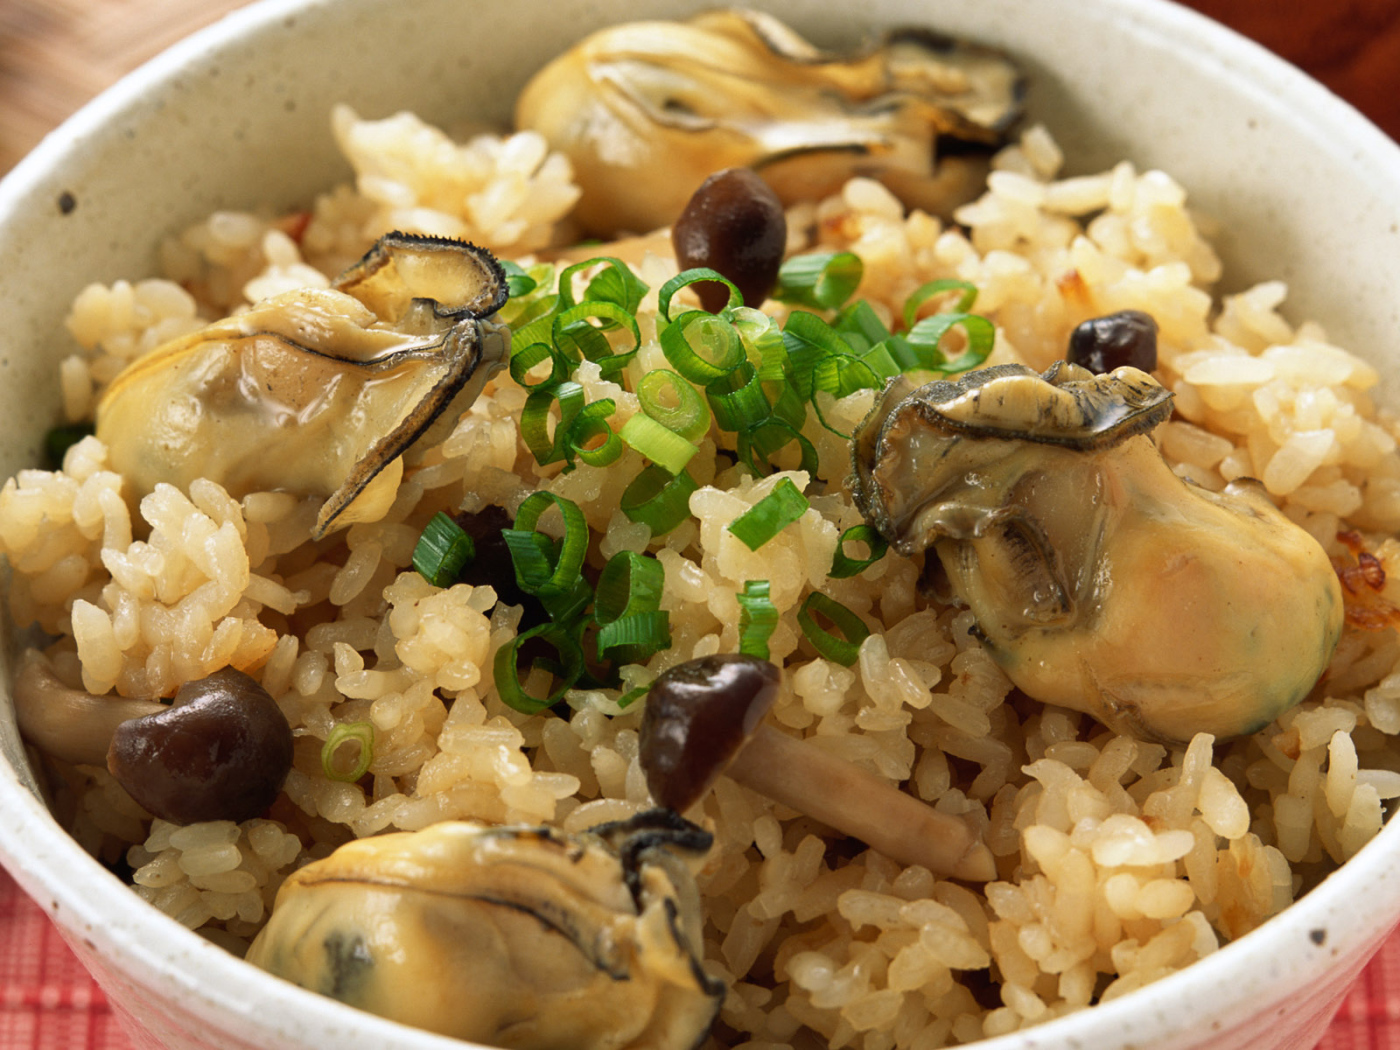 Seafood with rice and mushrooms